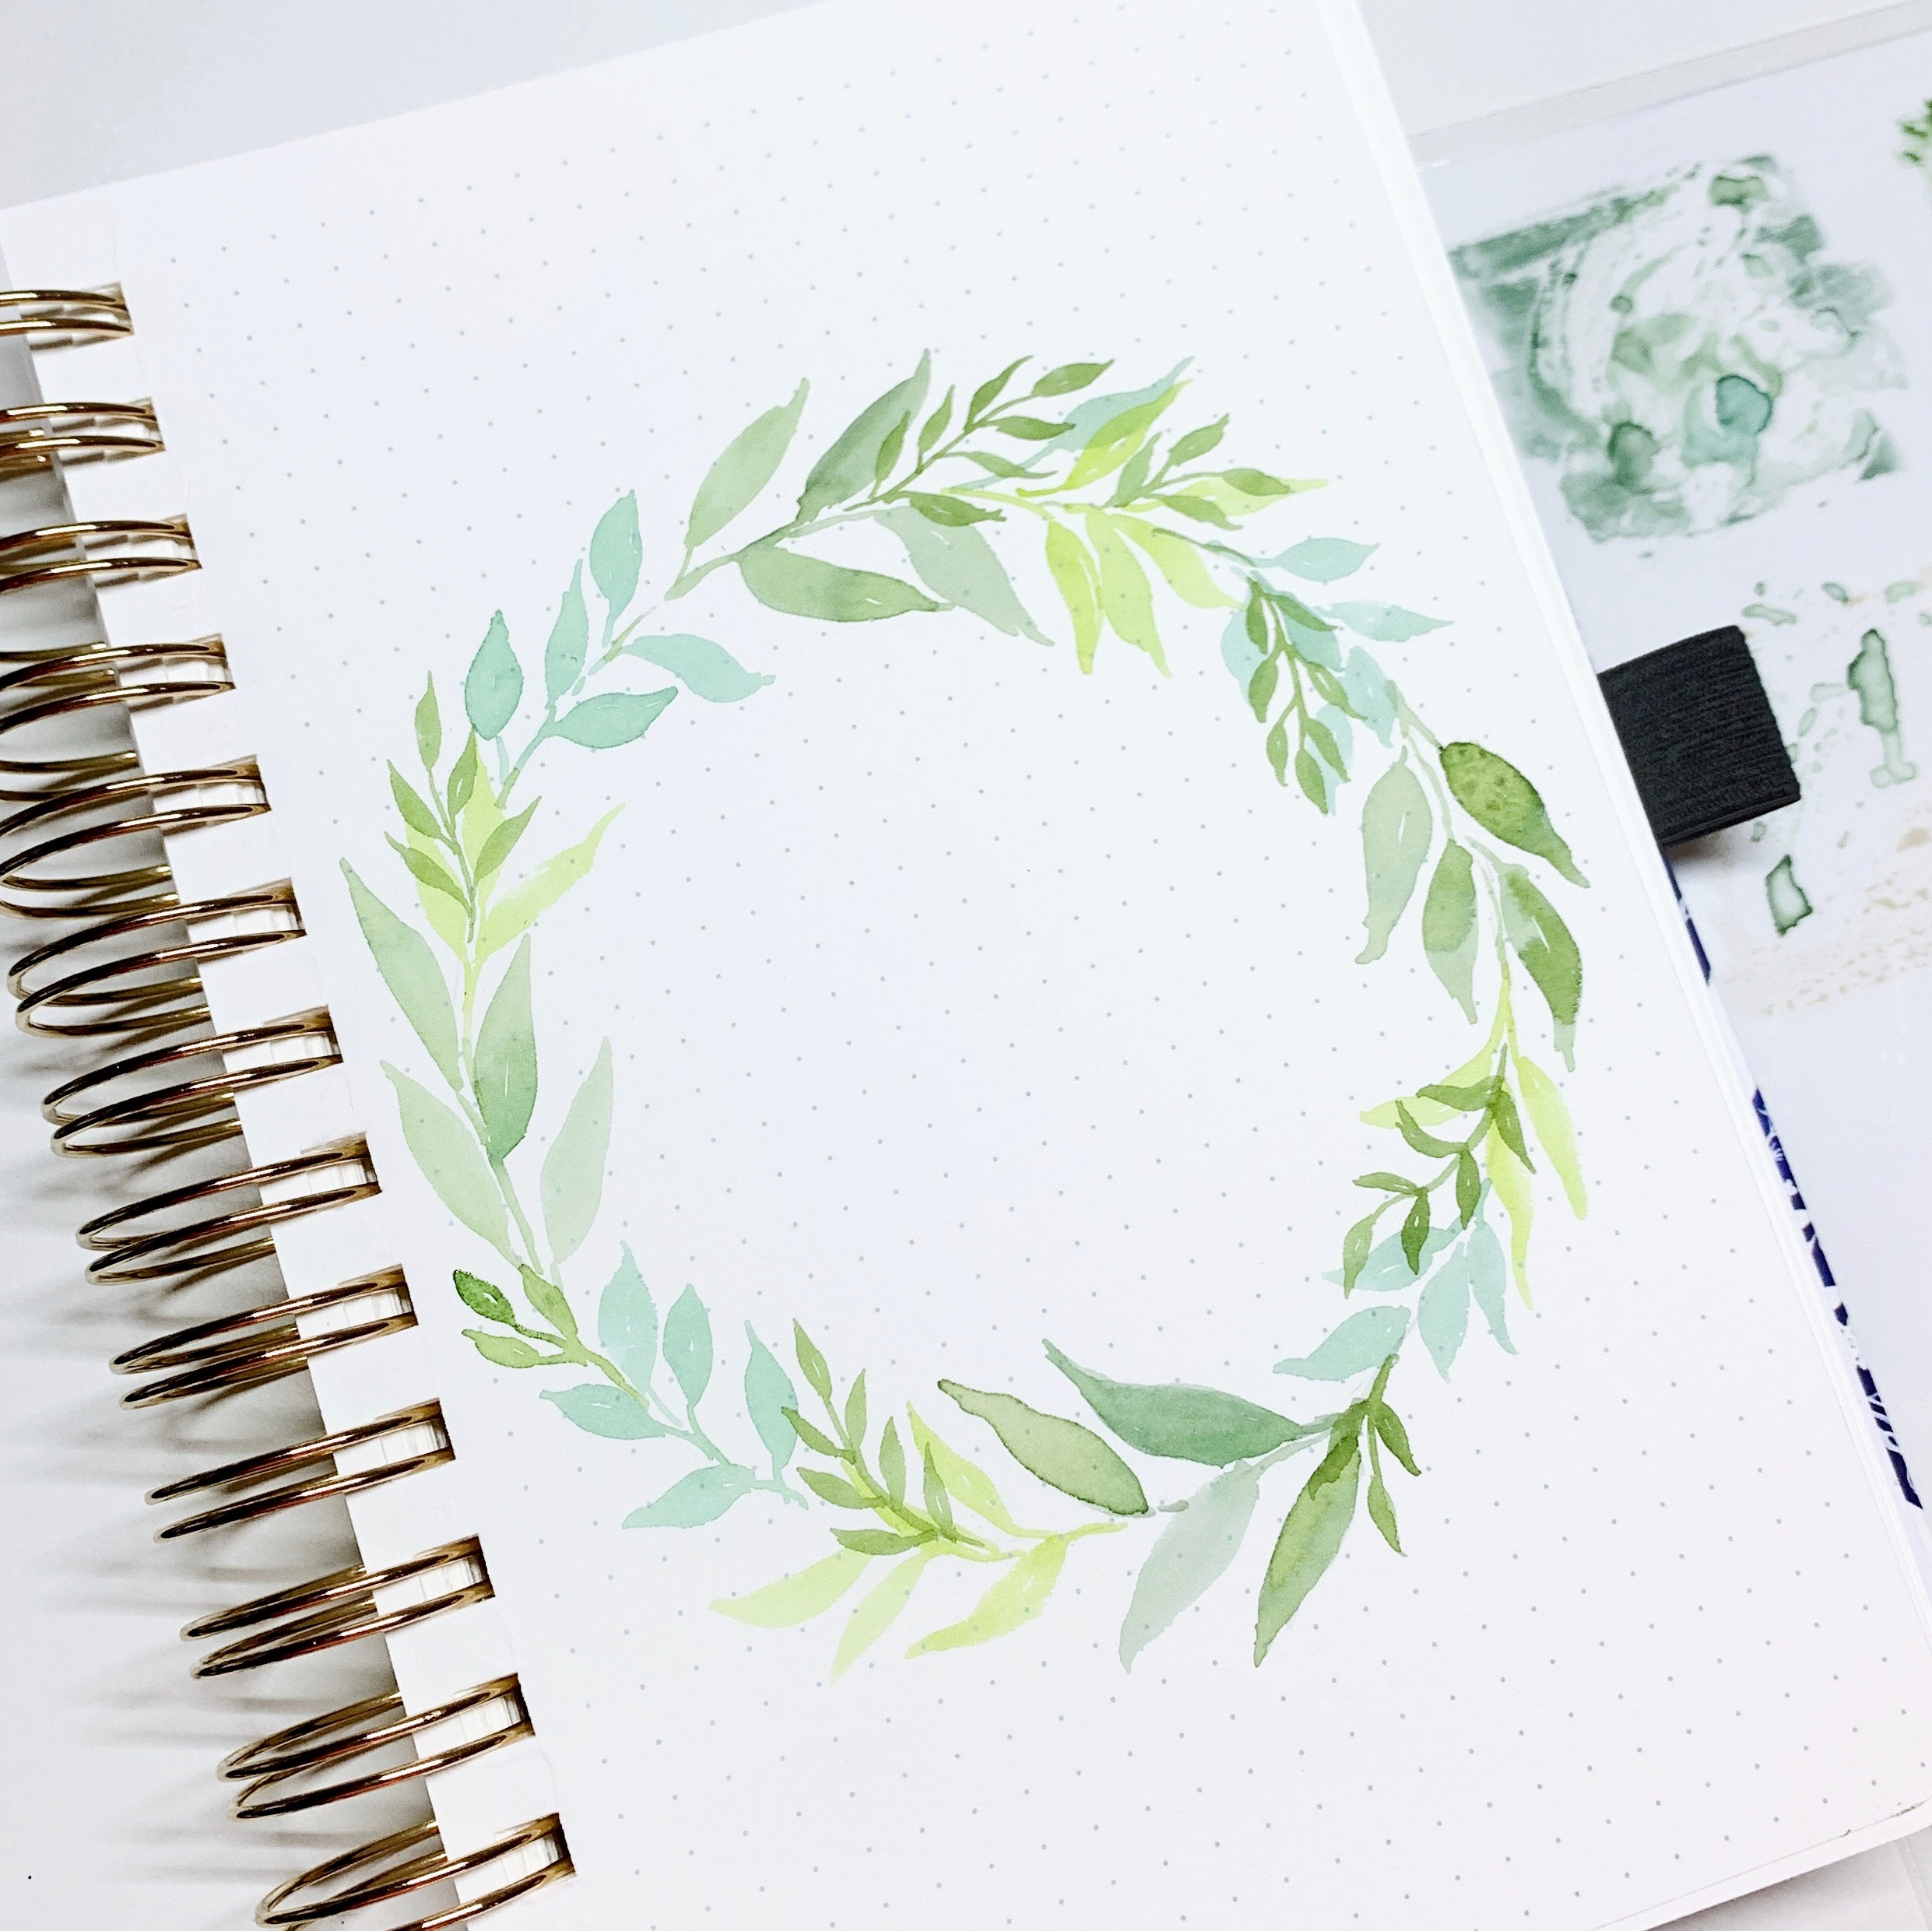 Learn how to create a holiday watercolor wreath with Adrienne from @studio80design!